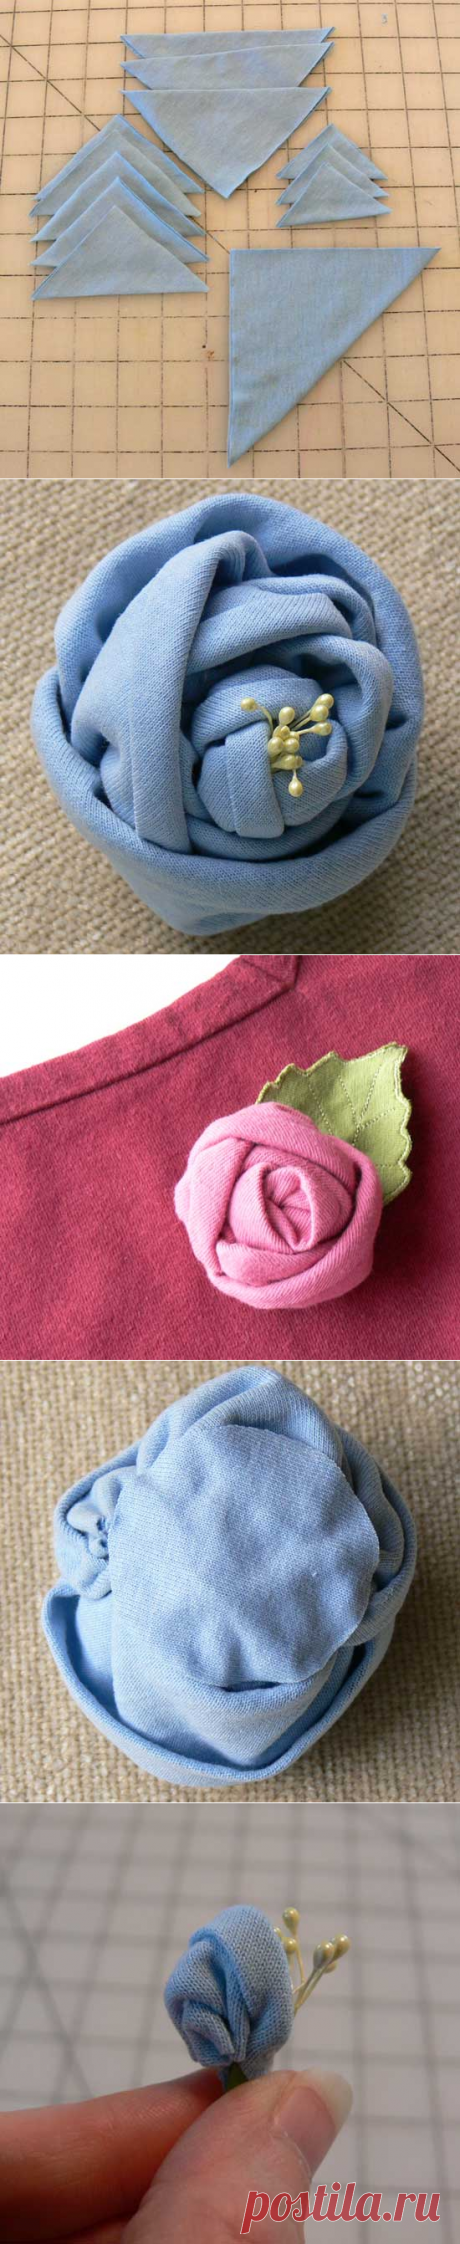 from these hands - Tutorials - T-shirt Fabric Rose Tutorial